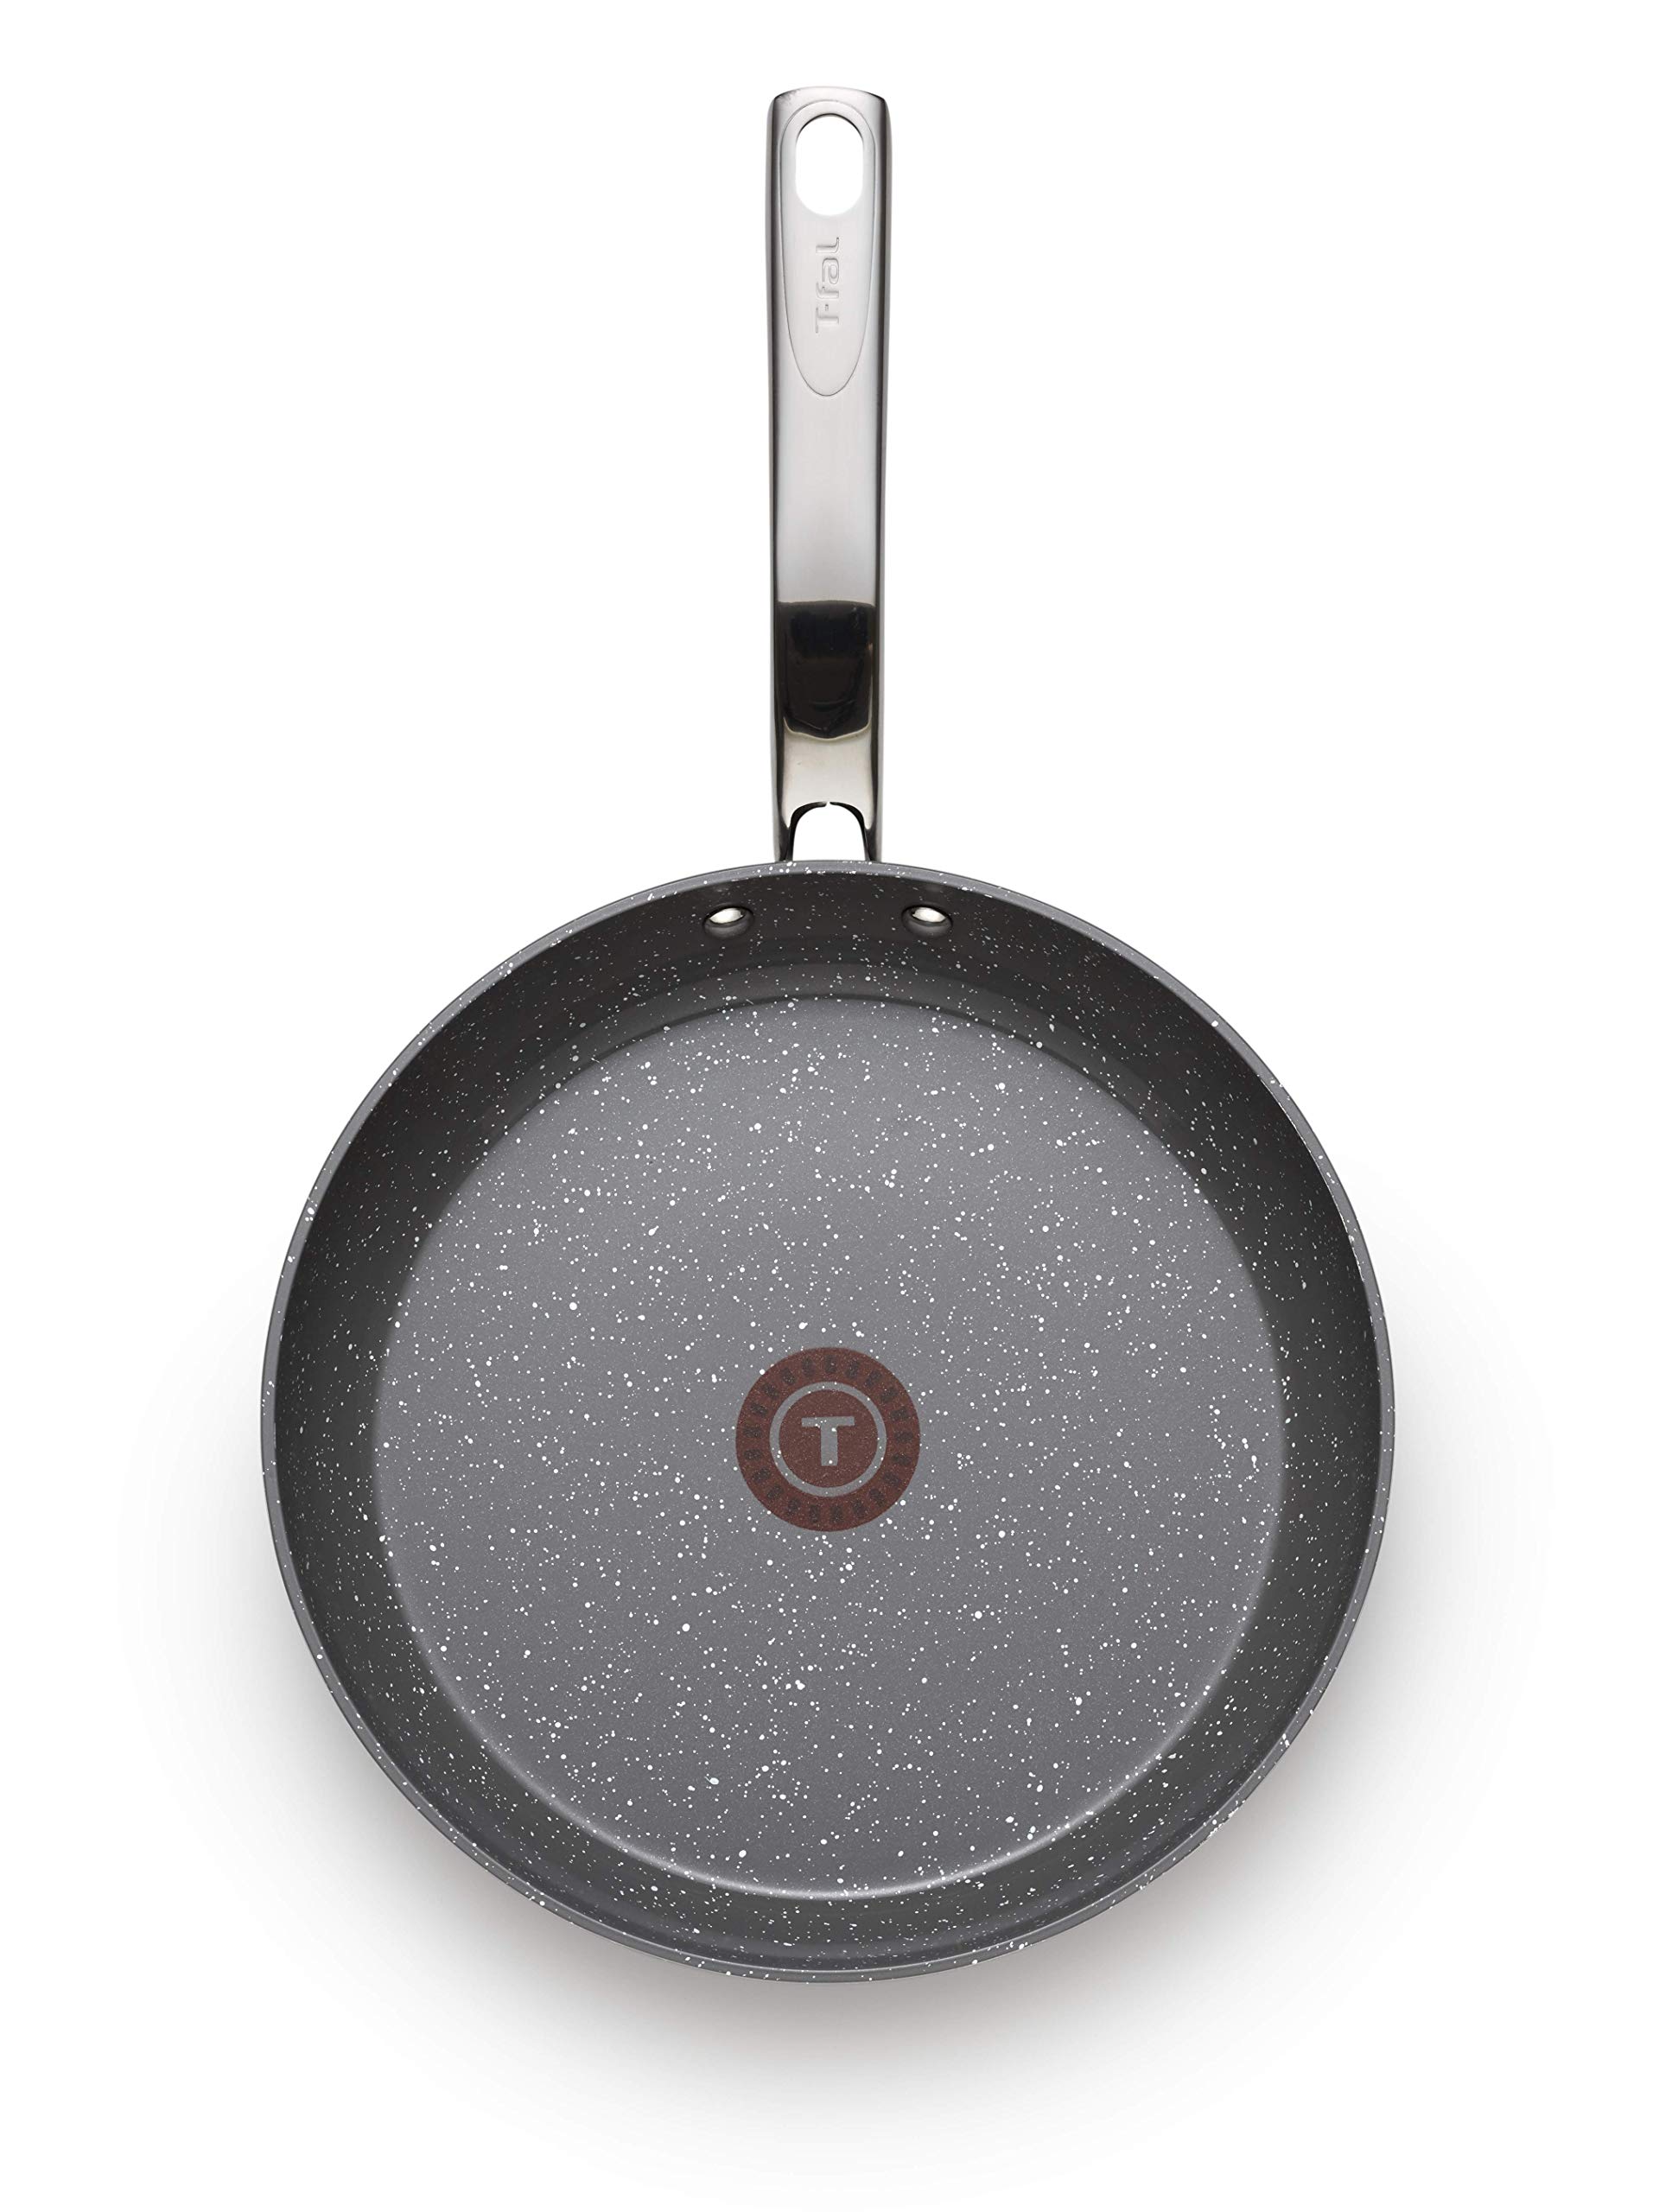 T-fal Endura Ceramic Nonstick Omelet Pan 8, 10.5 Inch, Oven Broiler Safe 500F, Cookware, Pots and Pans Grey